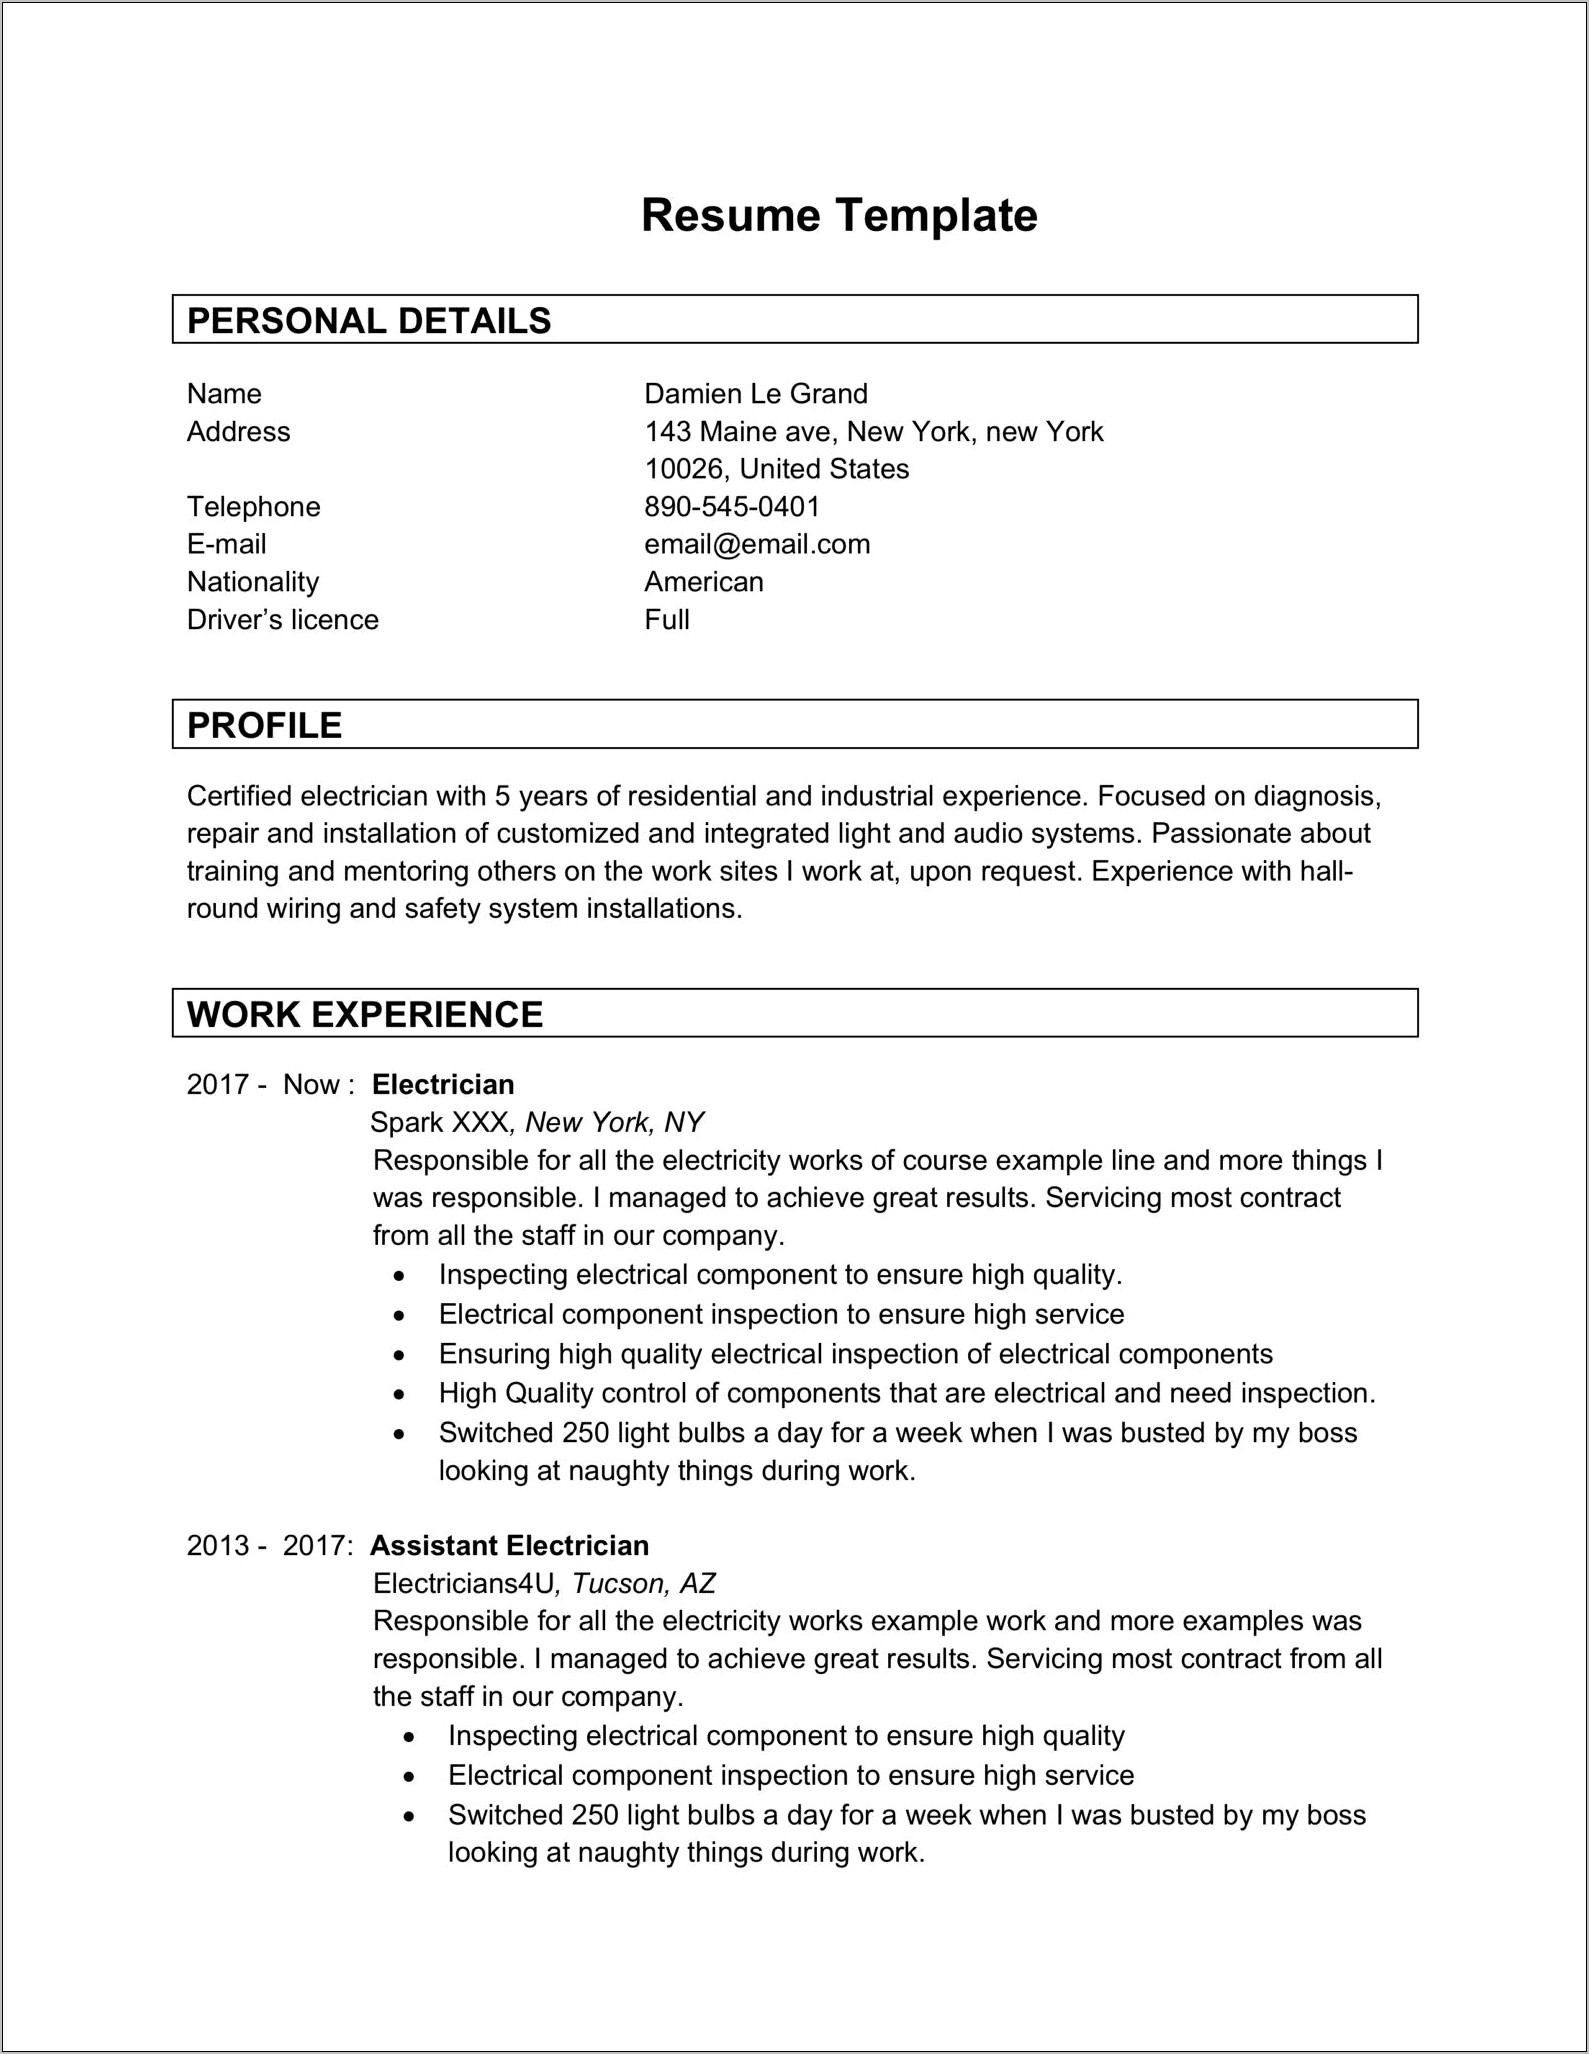 Microsoft Word Resume Template Examples